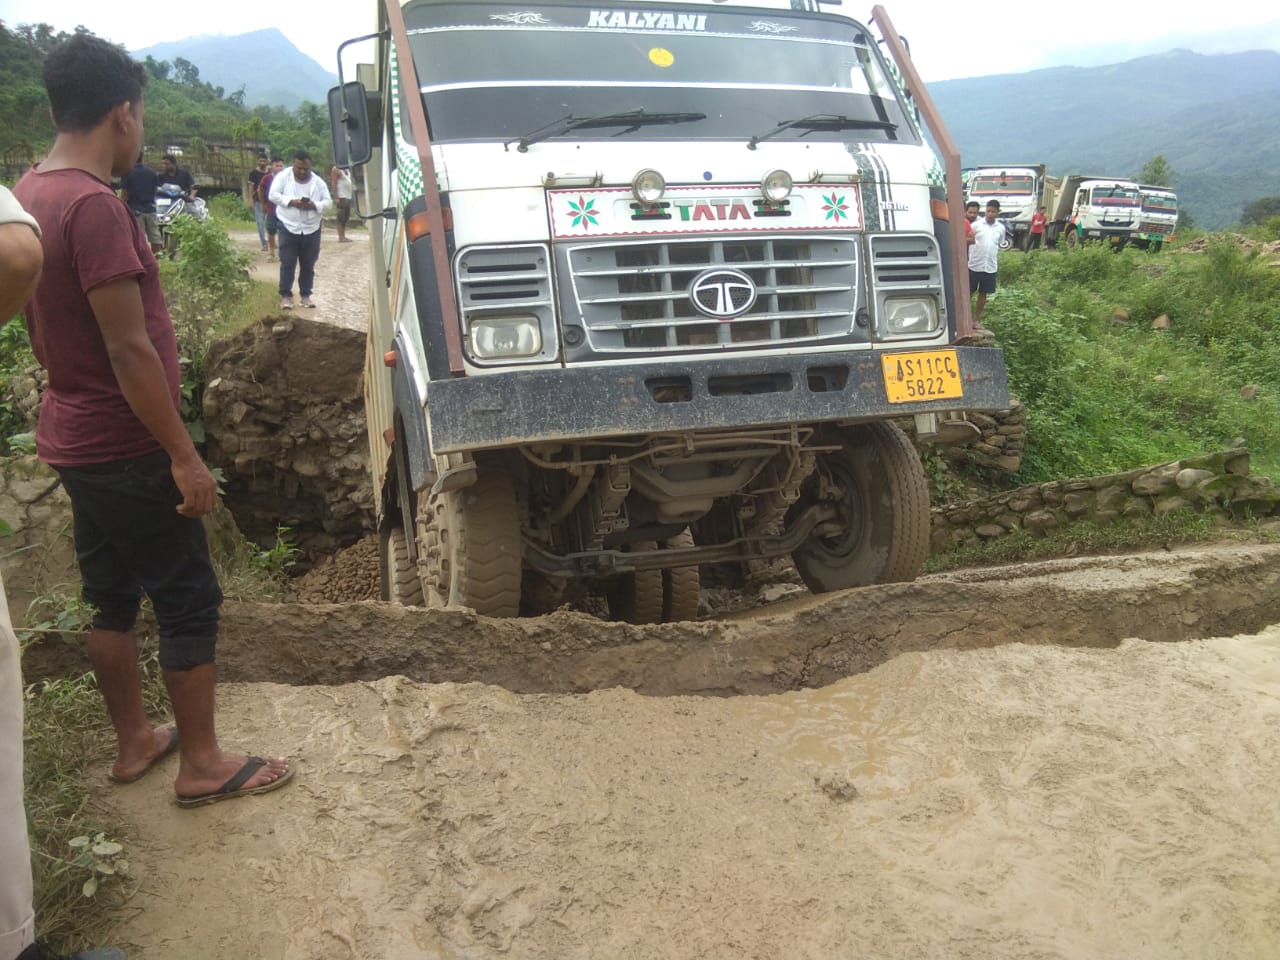 Dima hasao silchar road connectivity disrupted